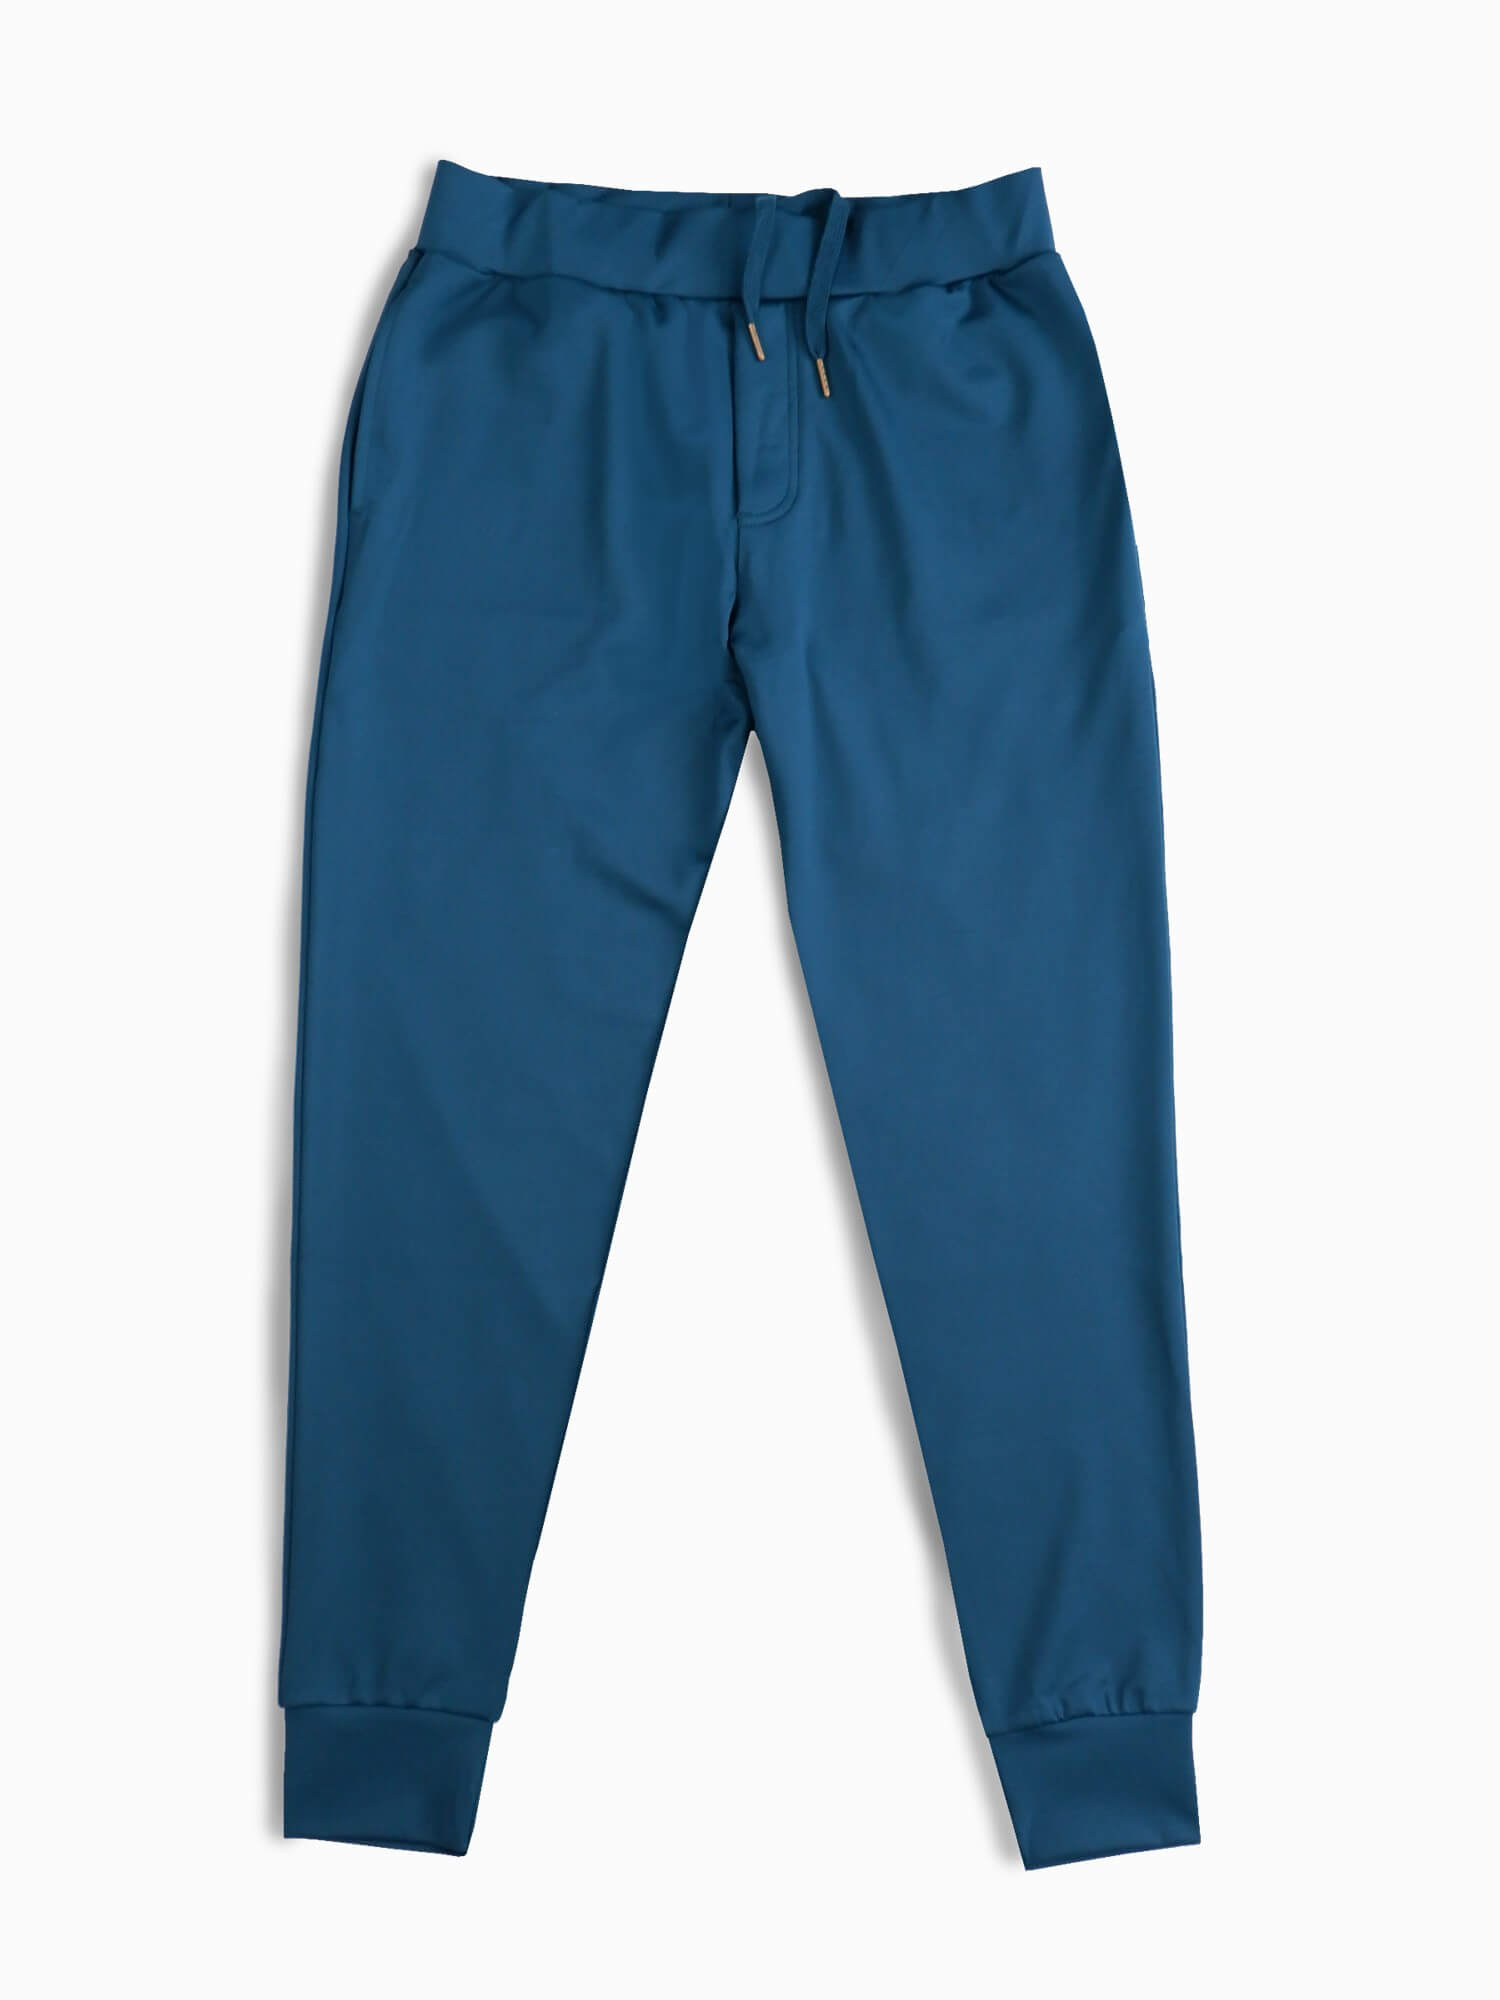 The Ultimate Comfort Jogger - Cloud Soft, 4-Way Stretch, Sustainable